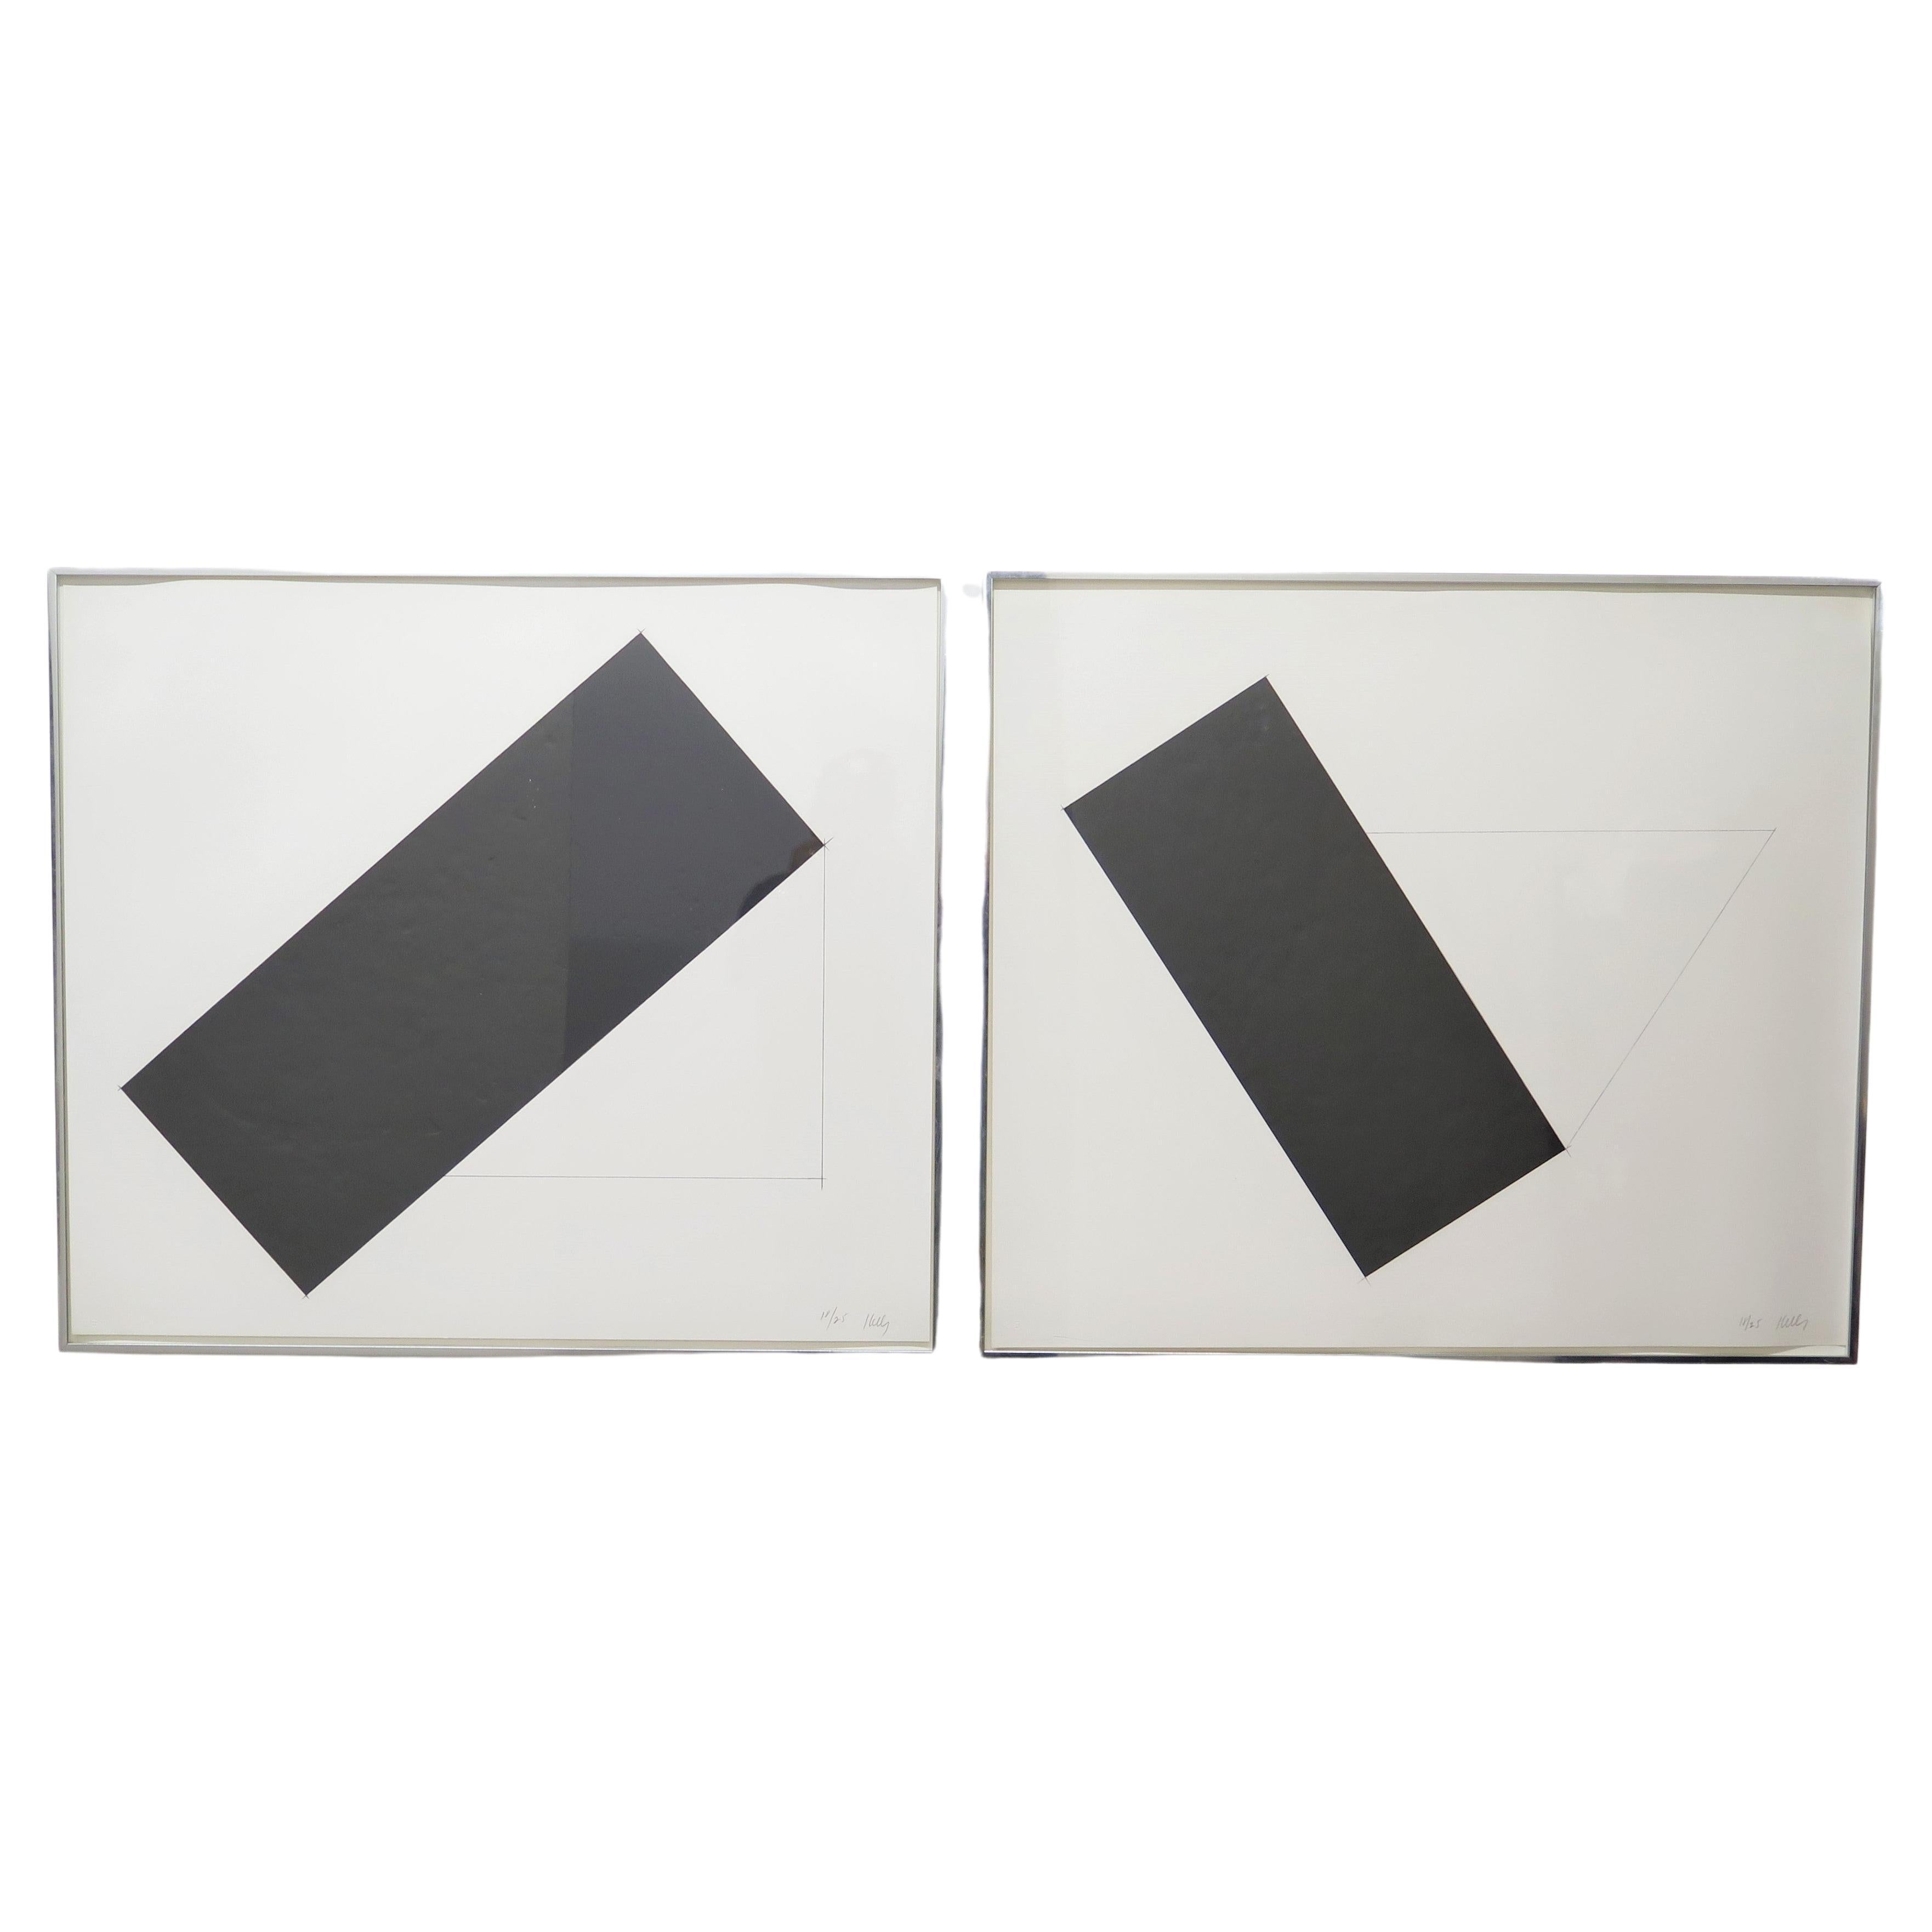 Ellsworth Kelly (American, 1923-2015) GRAND CASE and MARIGOT, 1980 For Sale